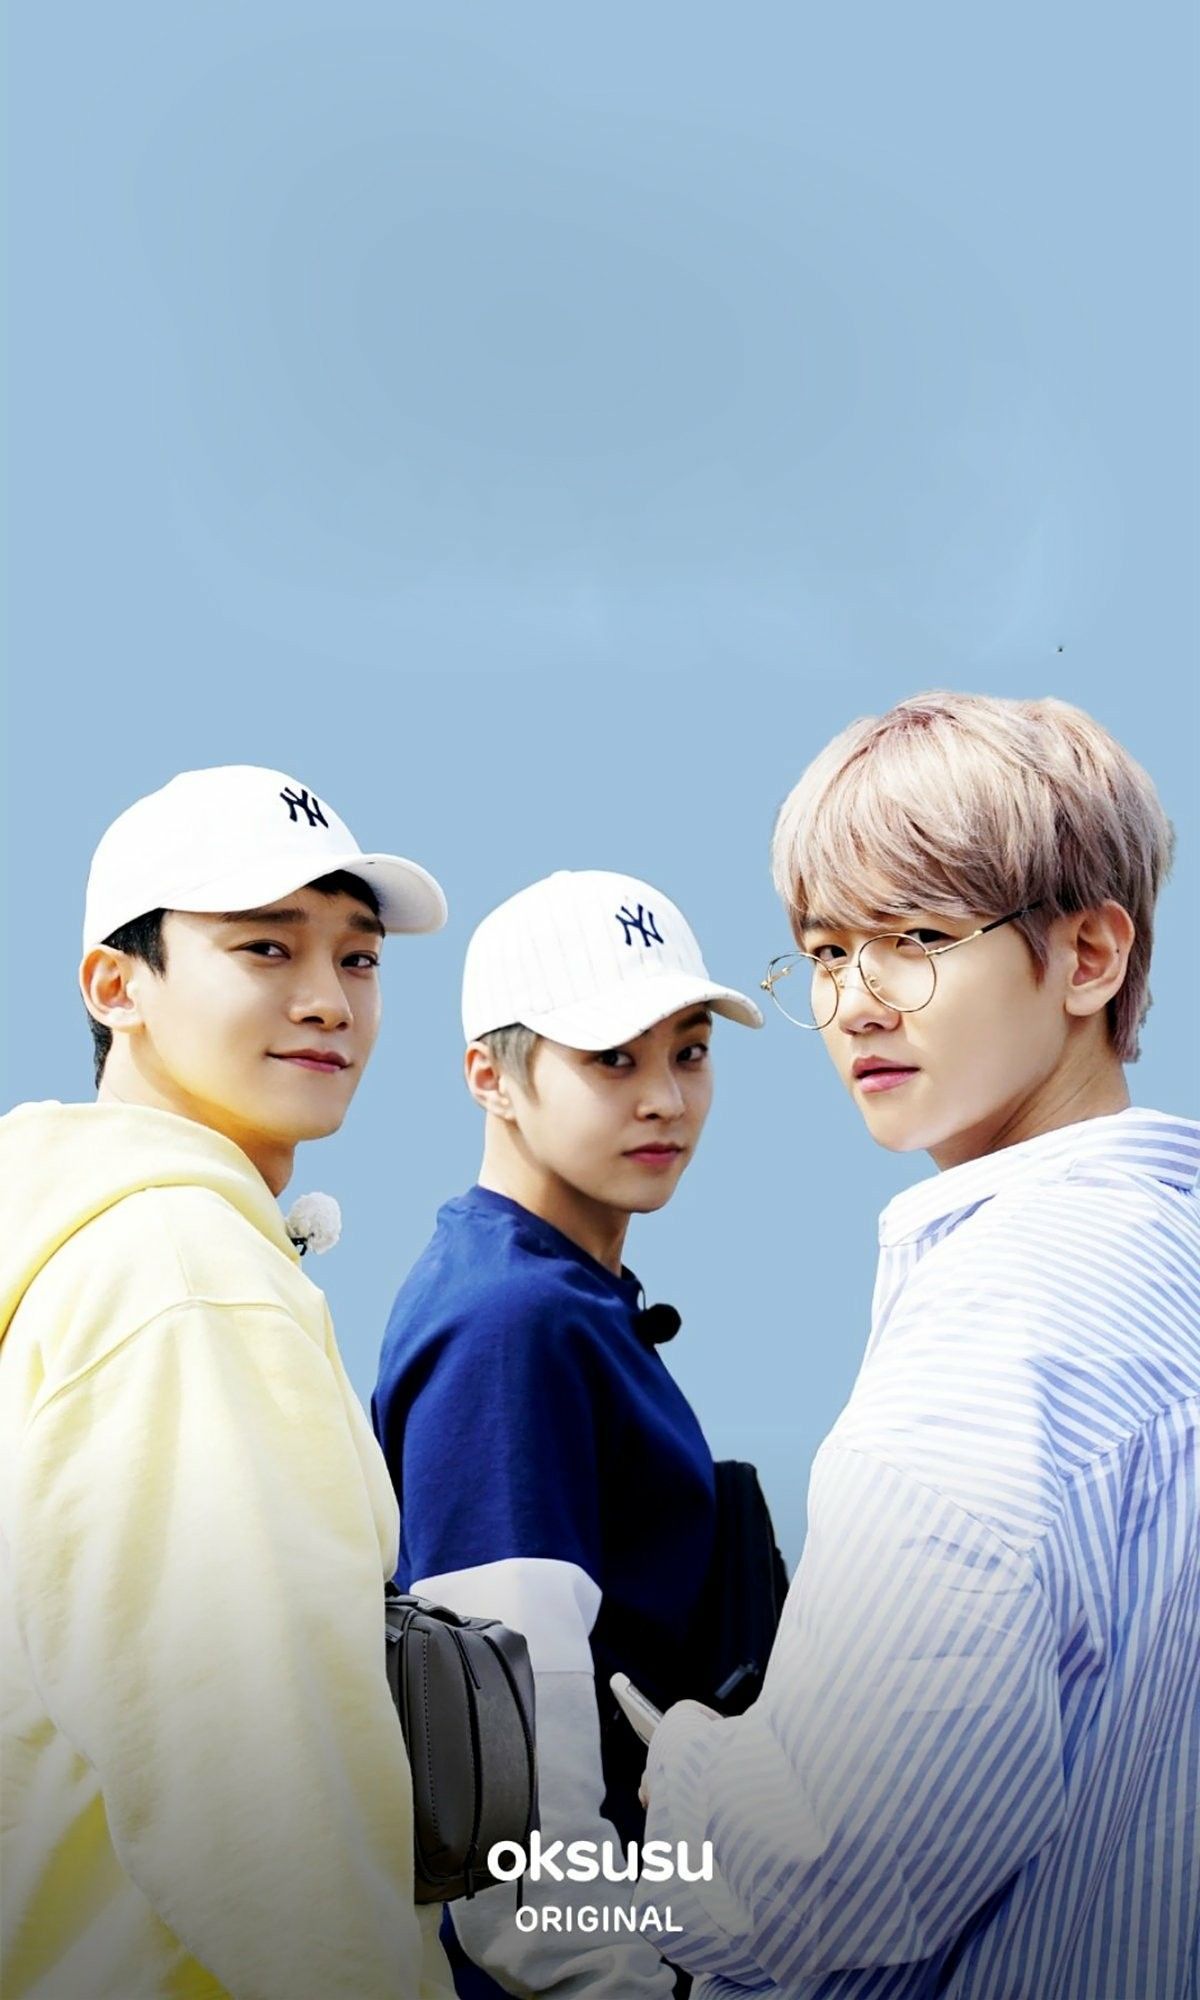 OFFICIAL 180420 Oksusu App Update With EXO CBX: “EXO 'Ride The Ladder, Travel The World' In Japan” Posters